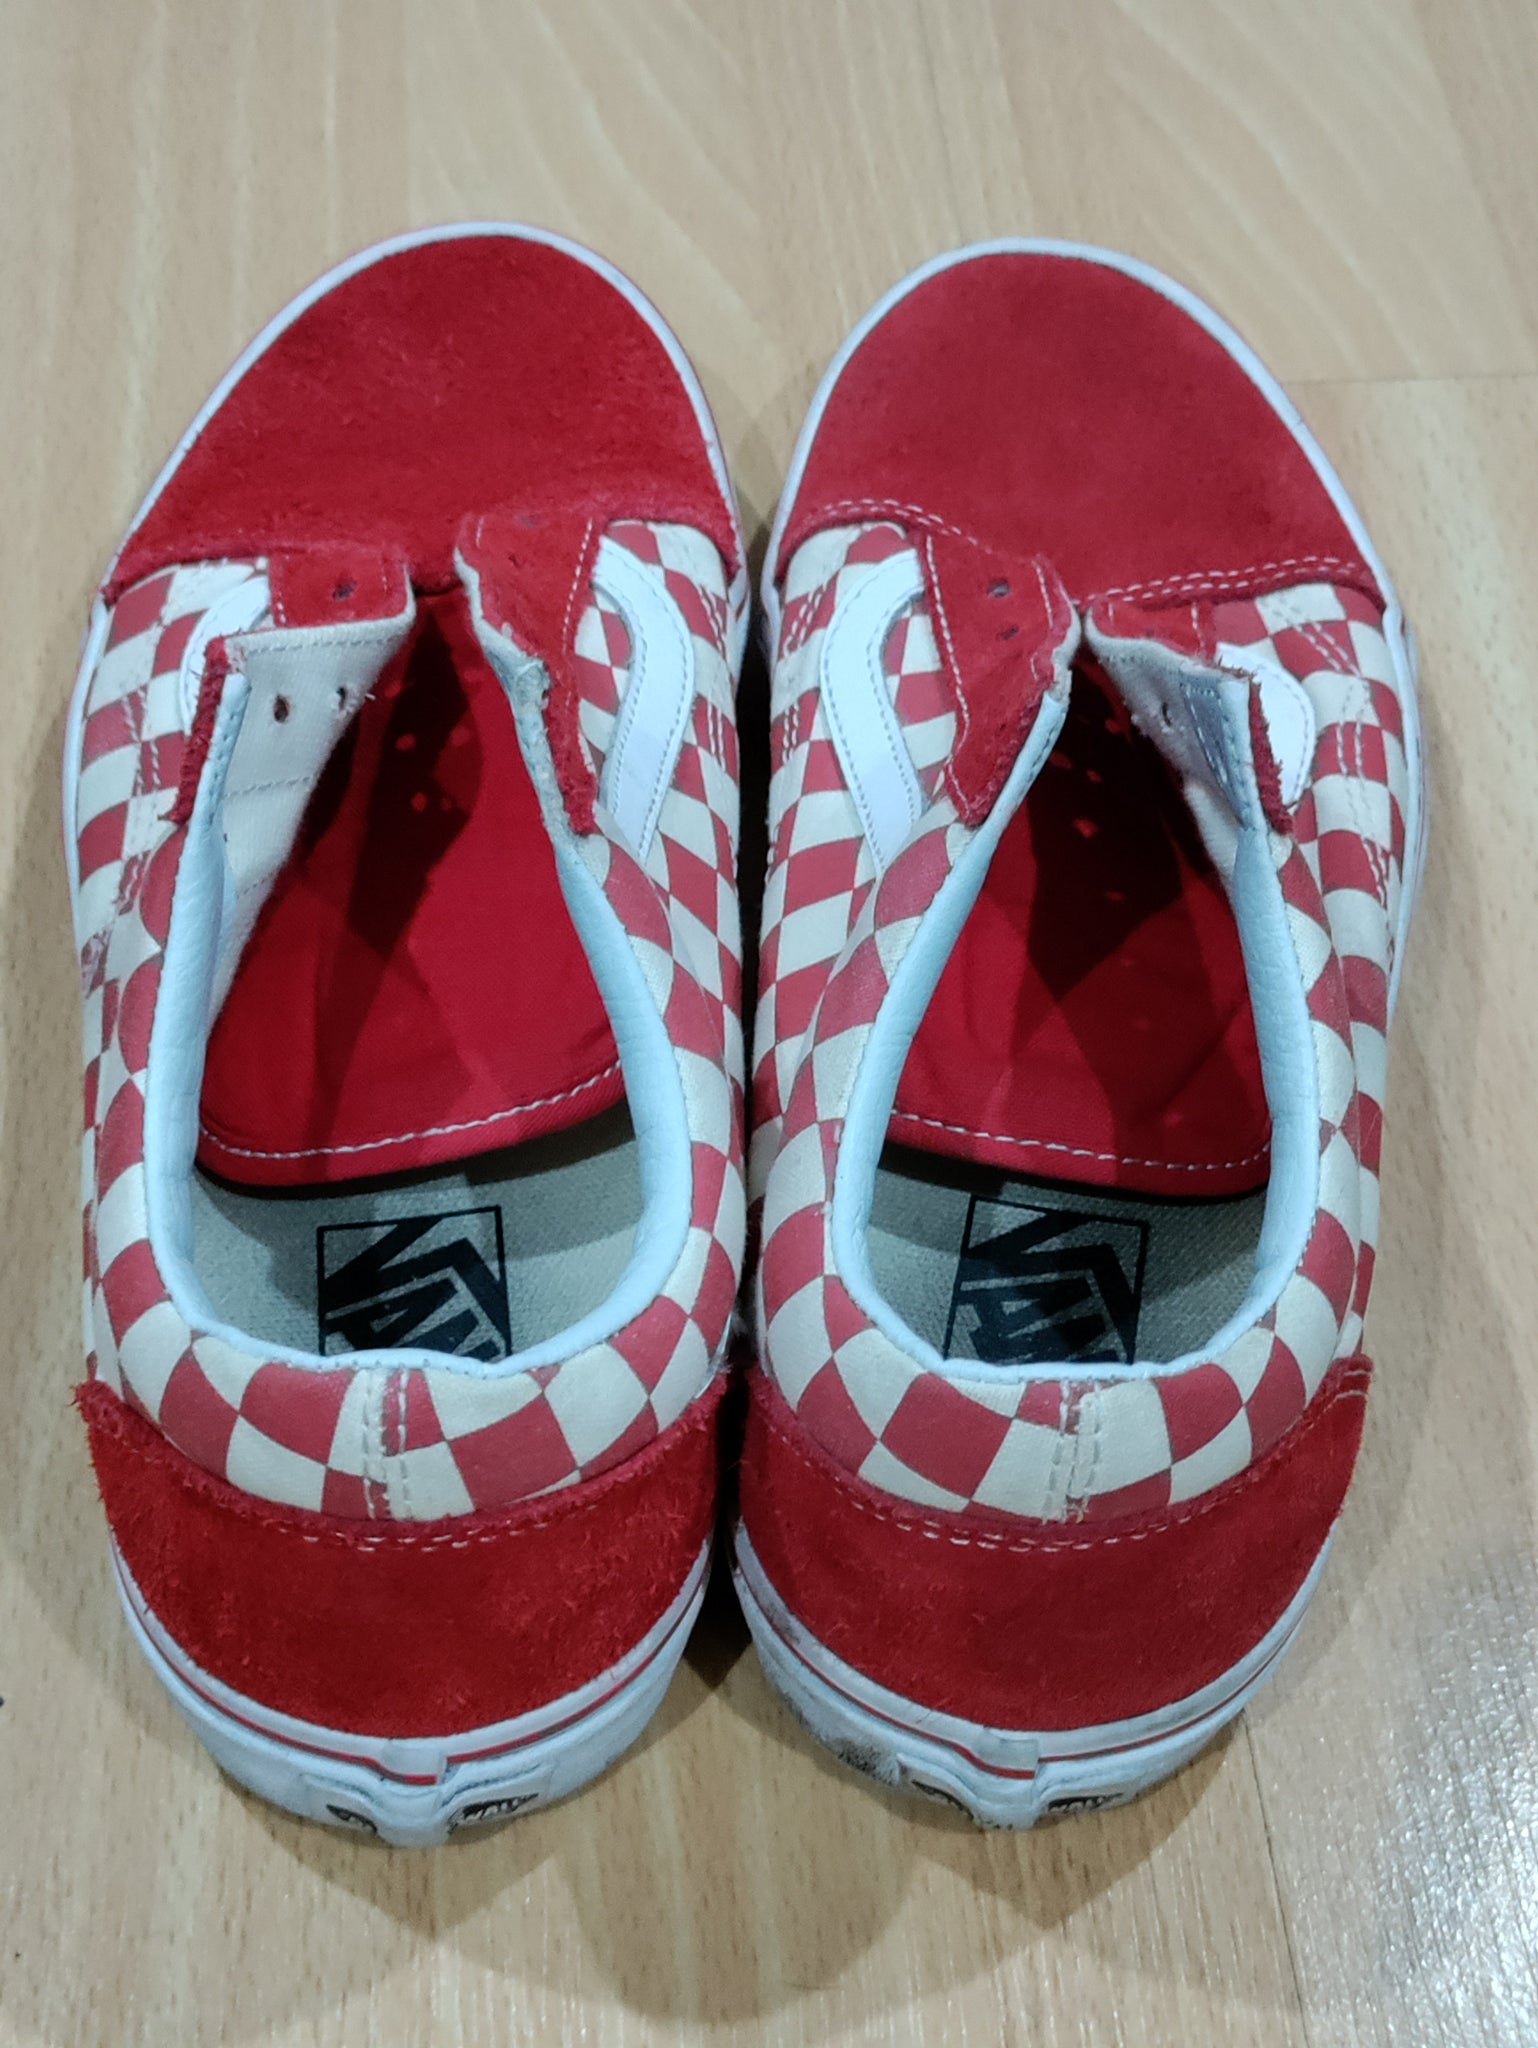 Vans checkered canvas sneakers